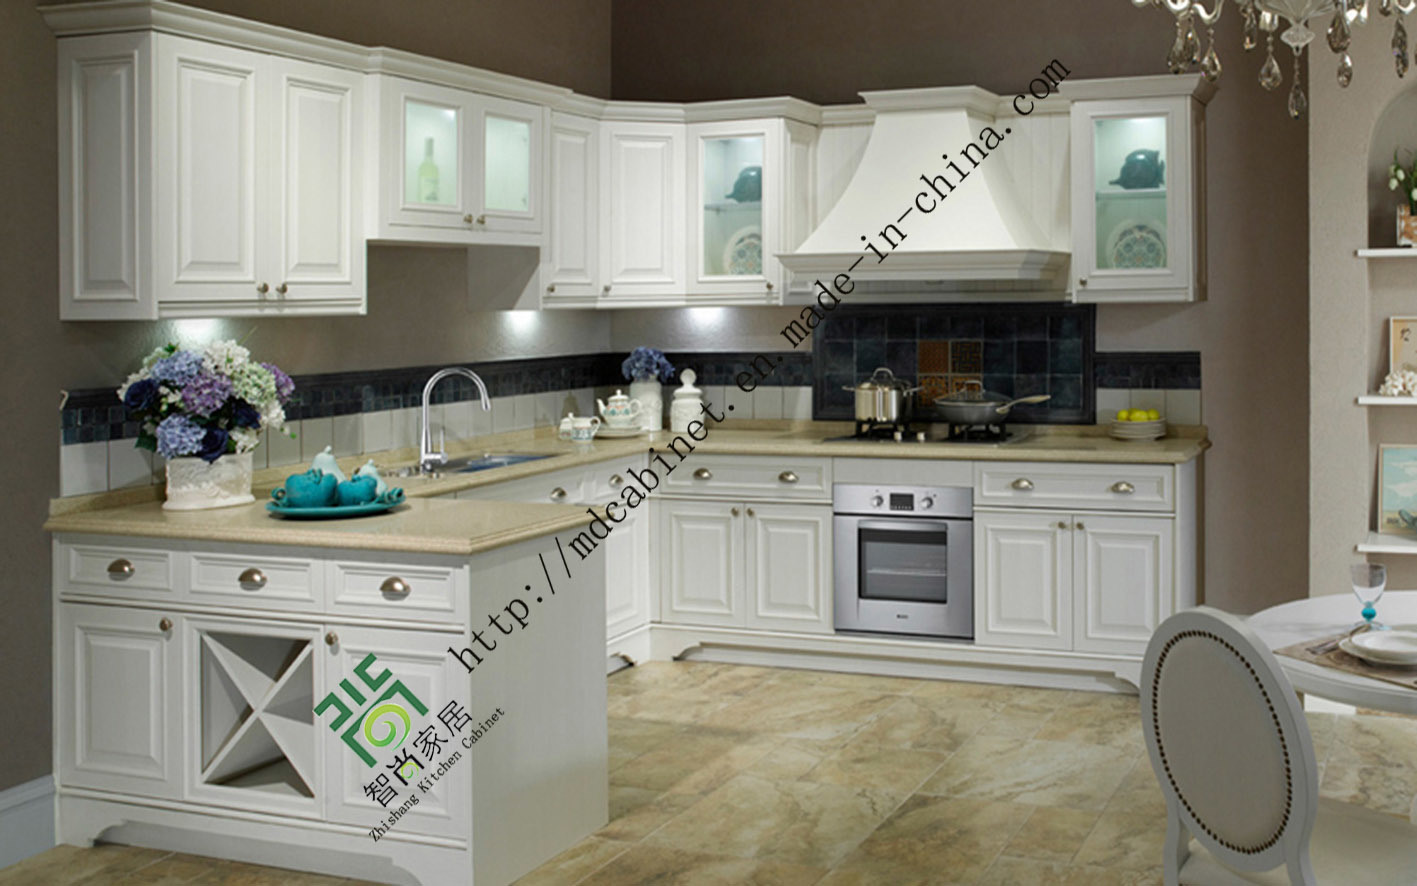 American Raised Style Solid Wood Kitchen Cabinets (zs-286)